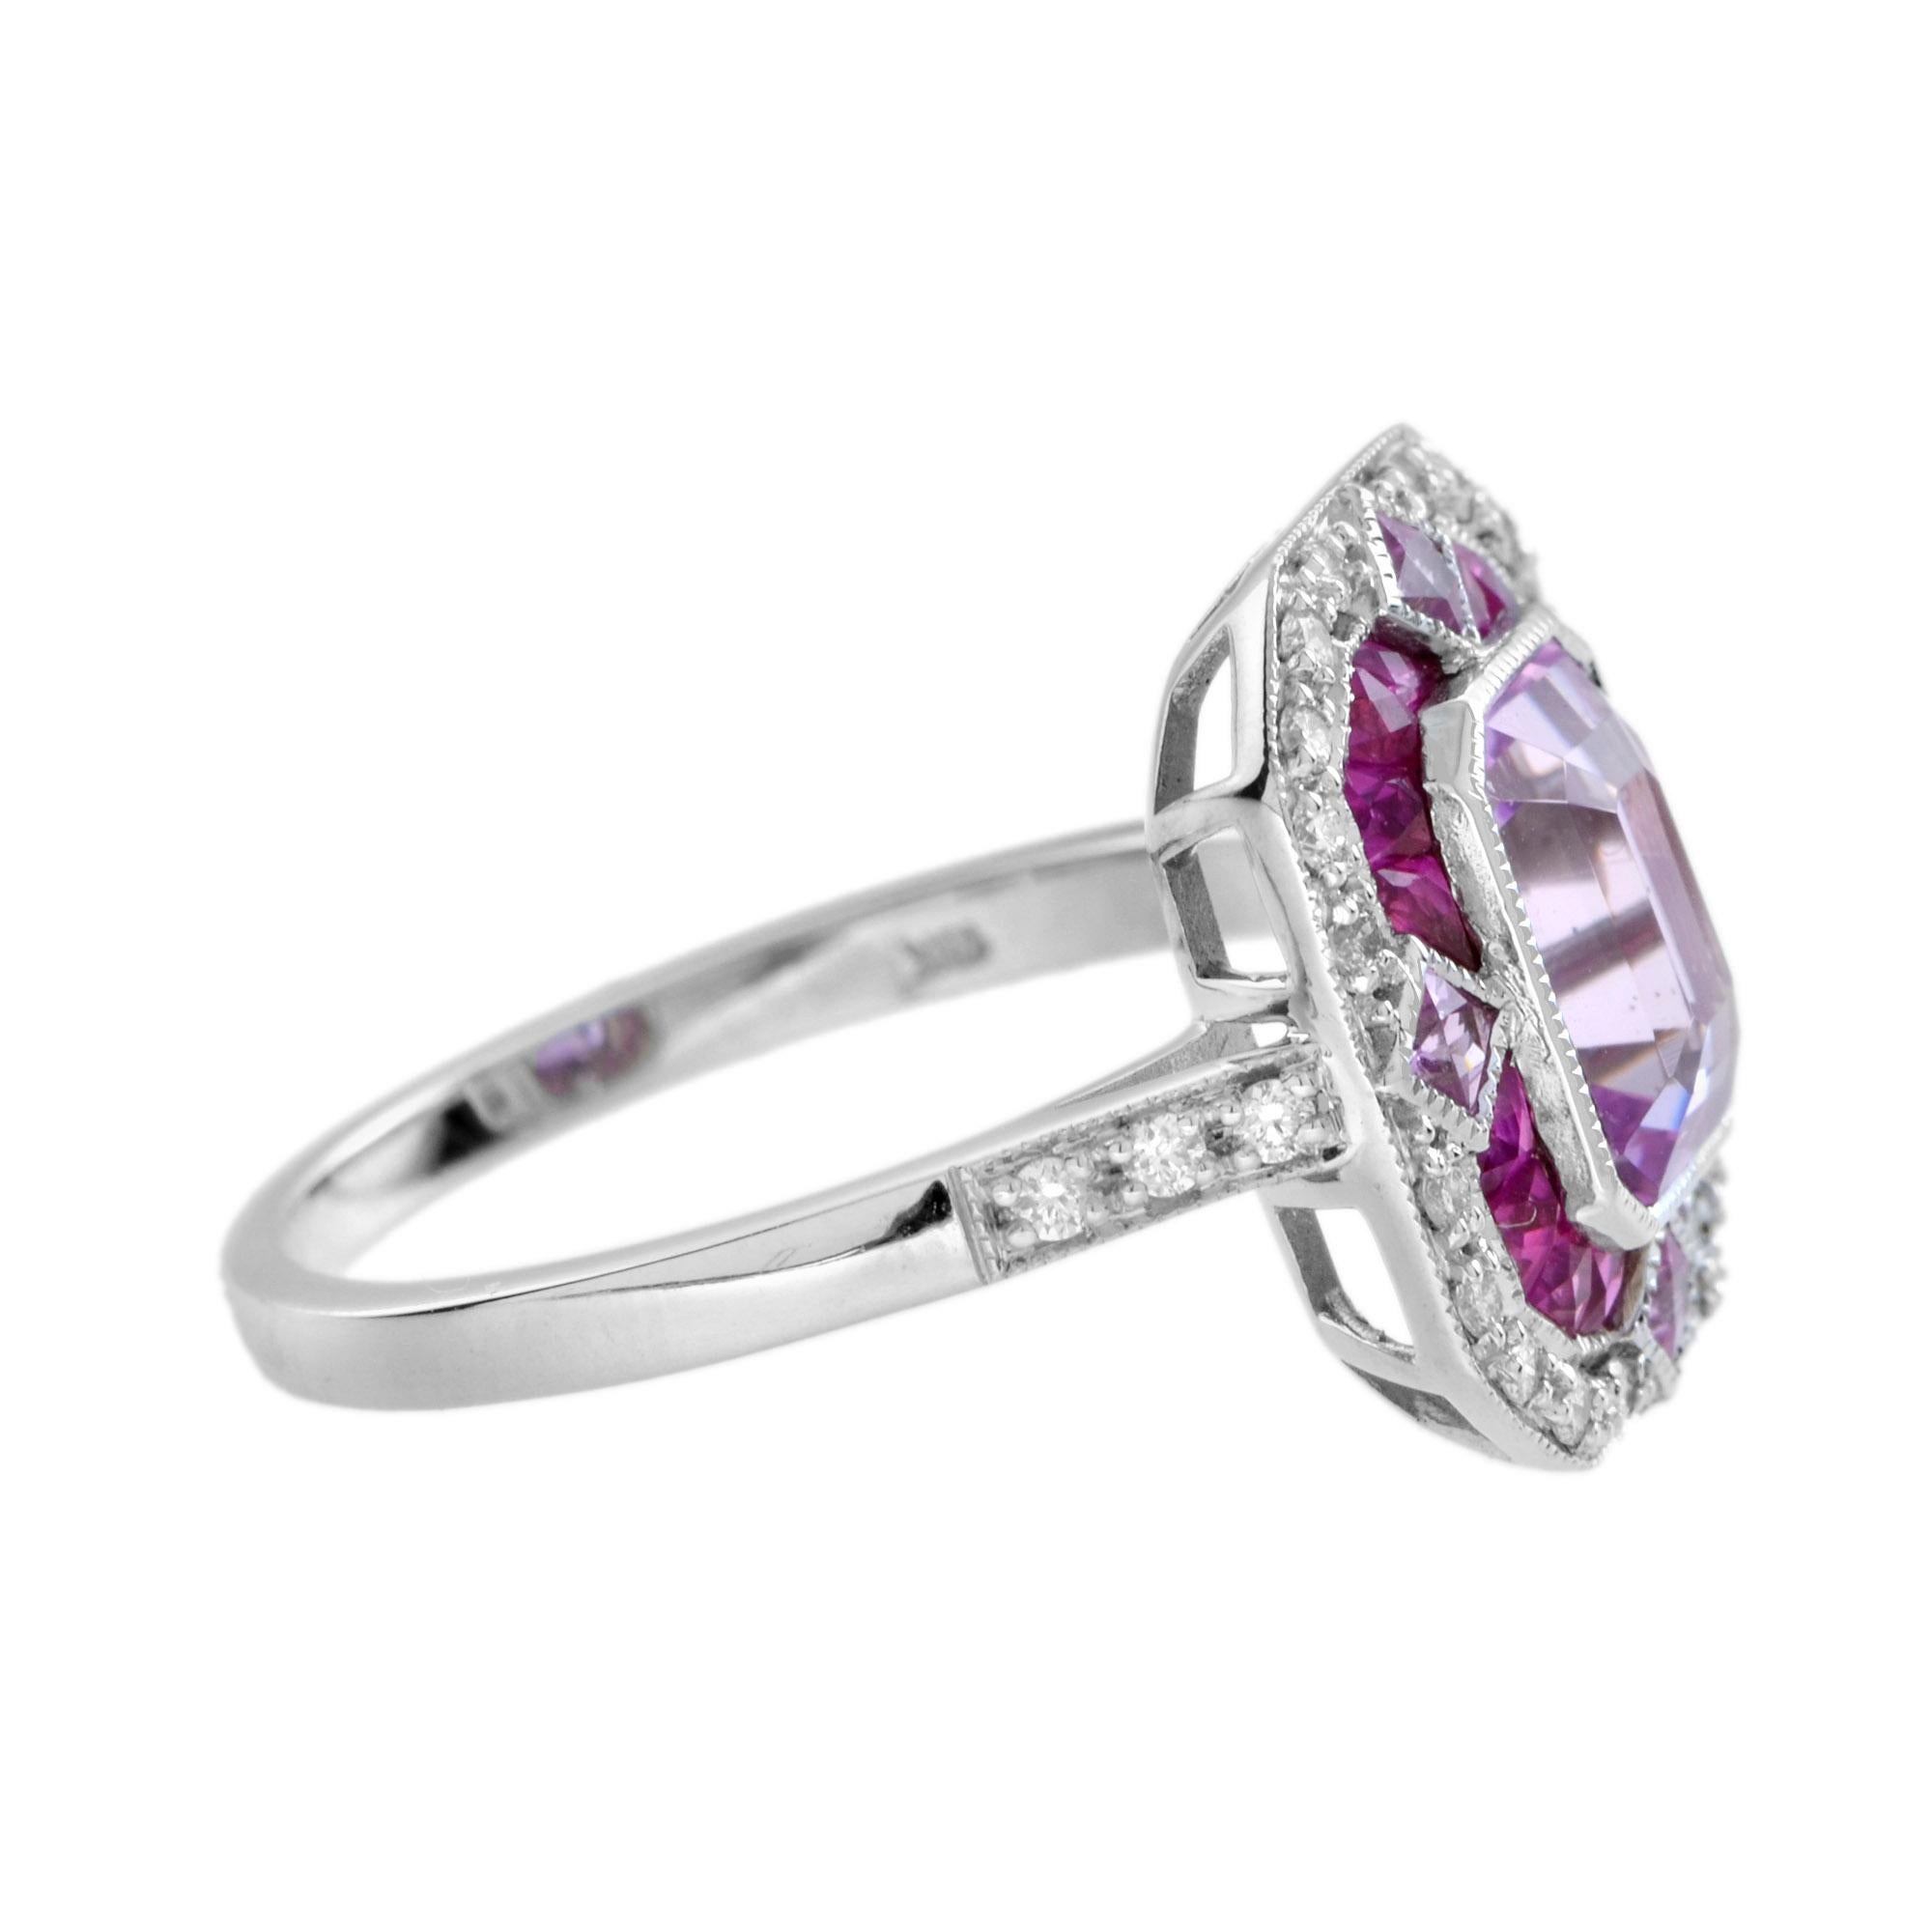 Emerald Cut Pink Kunzite Ruby Pink Sapphire Diamond Engagement Ring in 18k White Gold For Sale